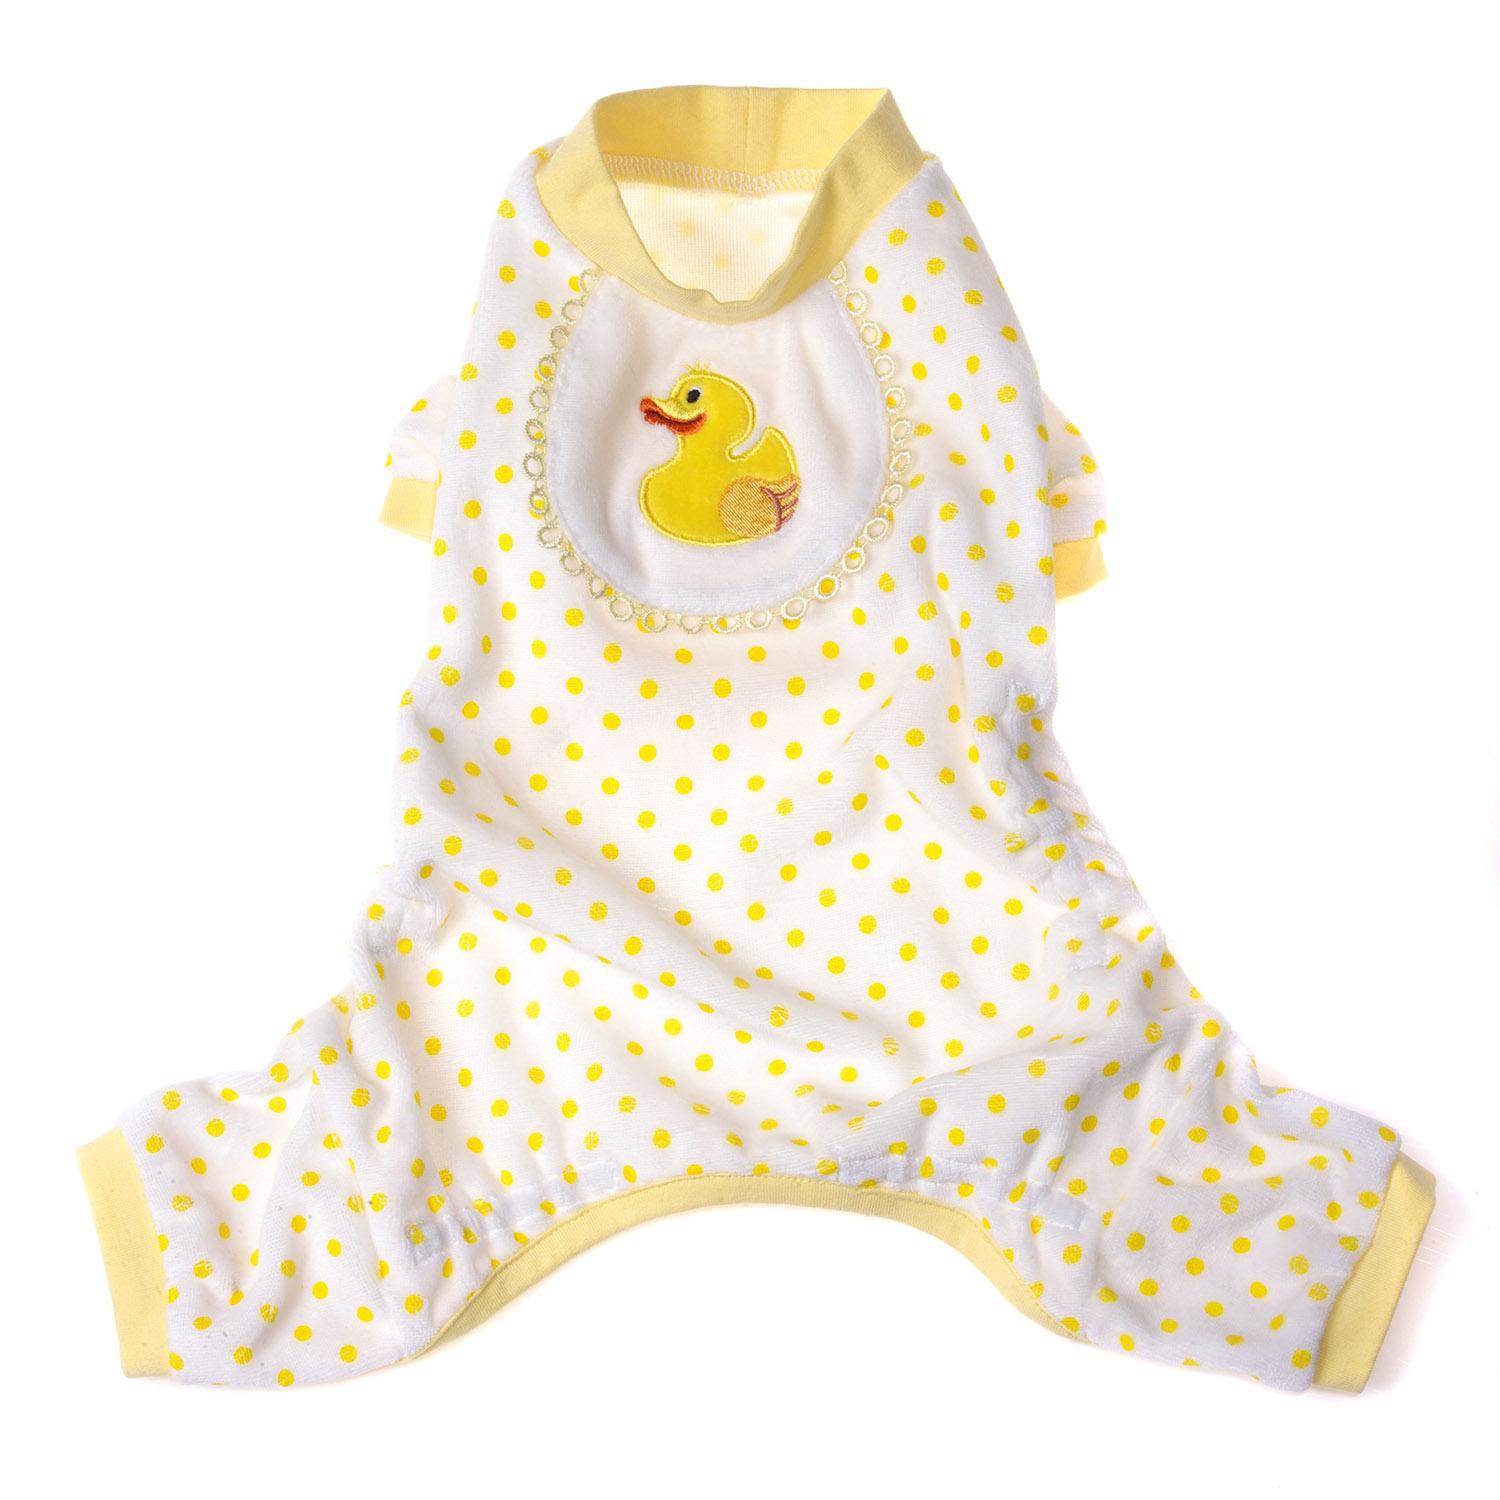 Pooch Outfitters Ducky Design Dog Pajamas - Yellow